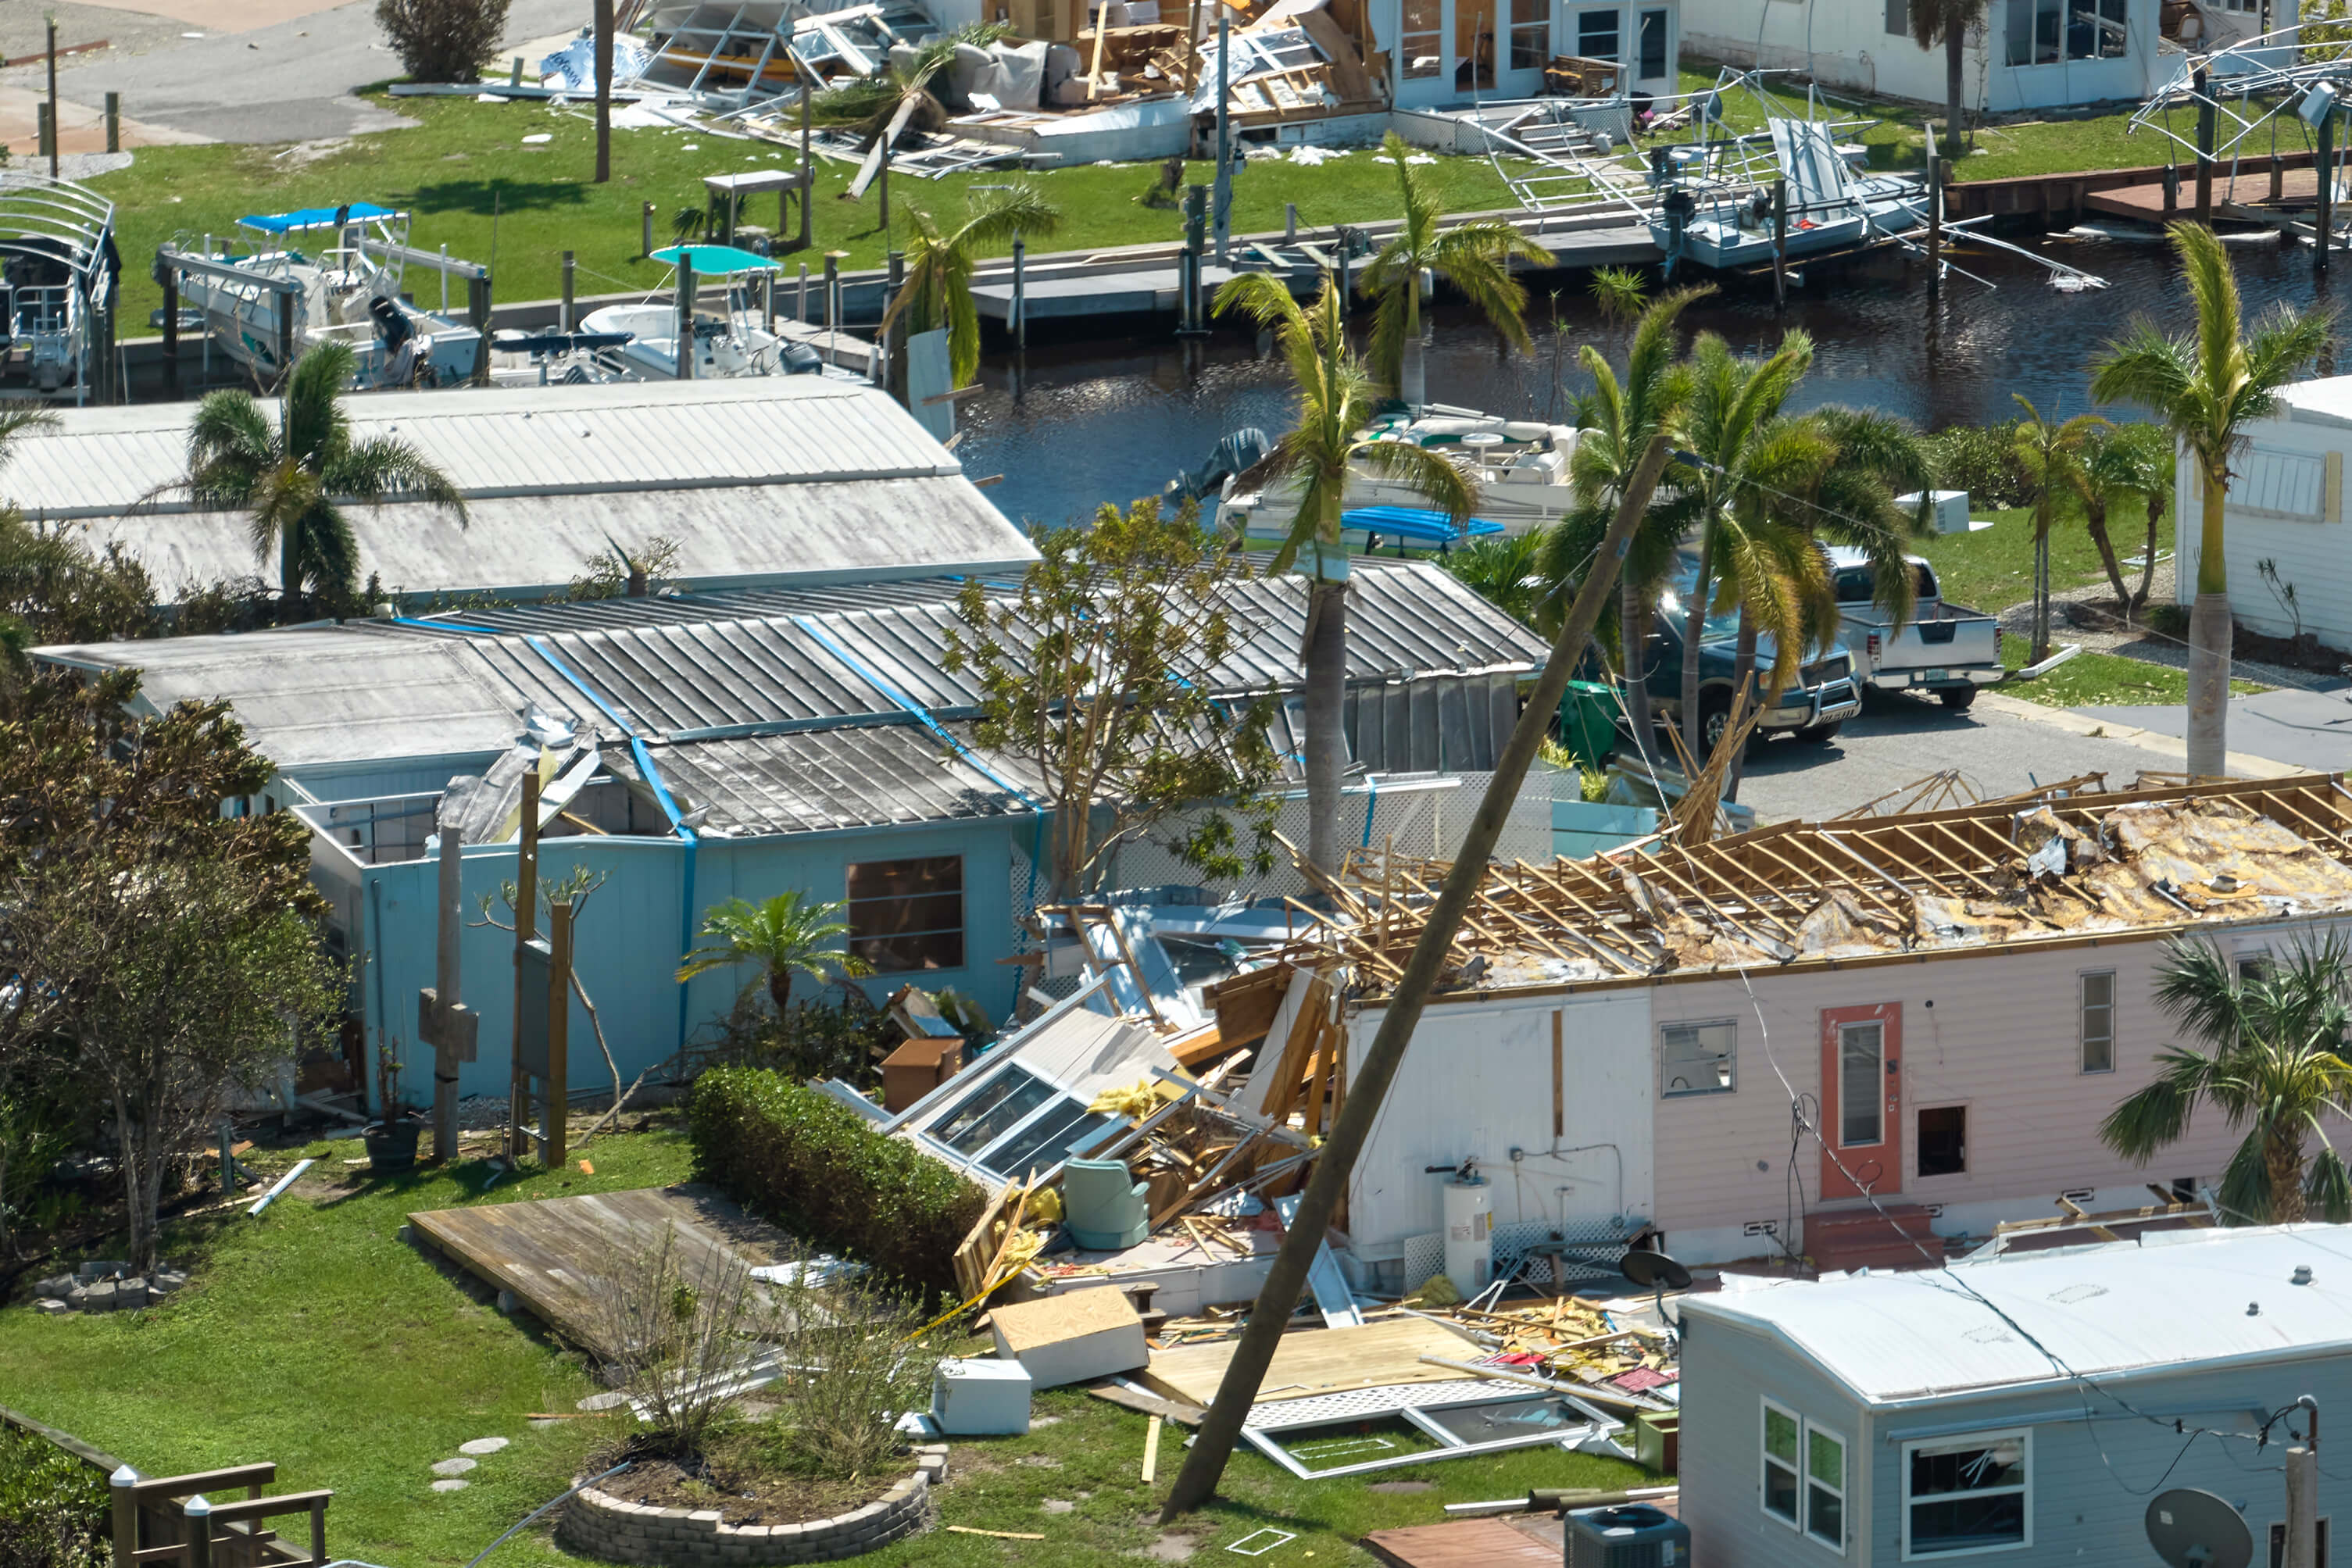 hurricane-ian-destroyed-homes-florida-residential-area-natural-disaster-its-consequences